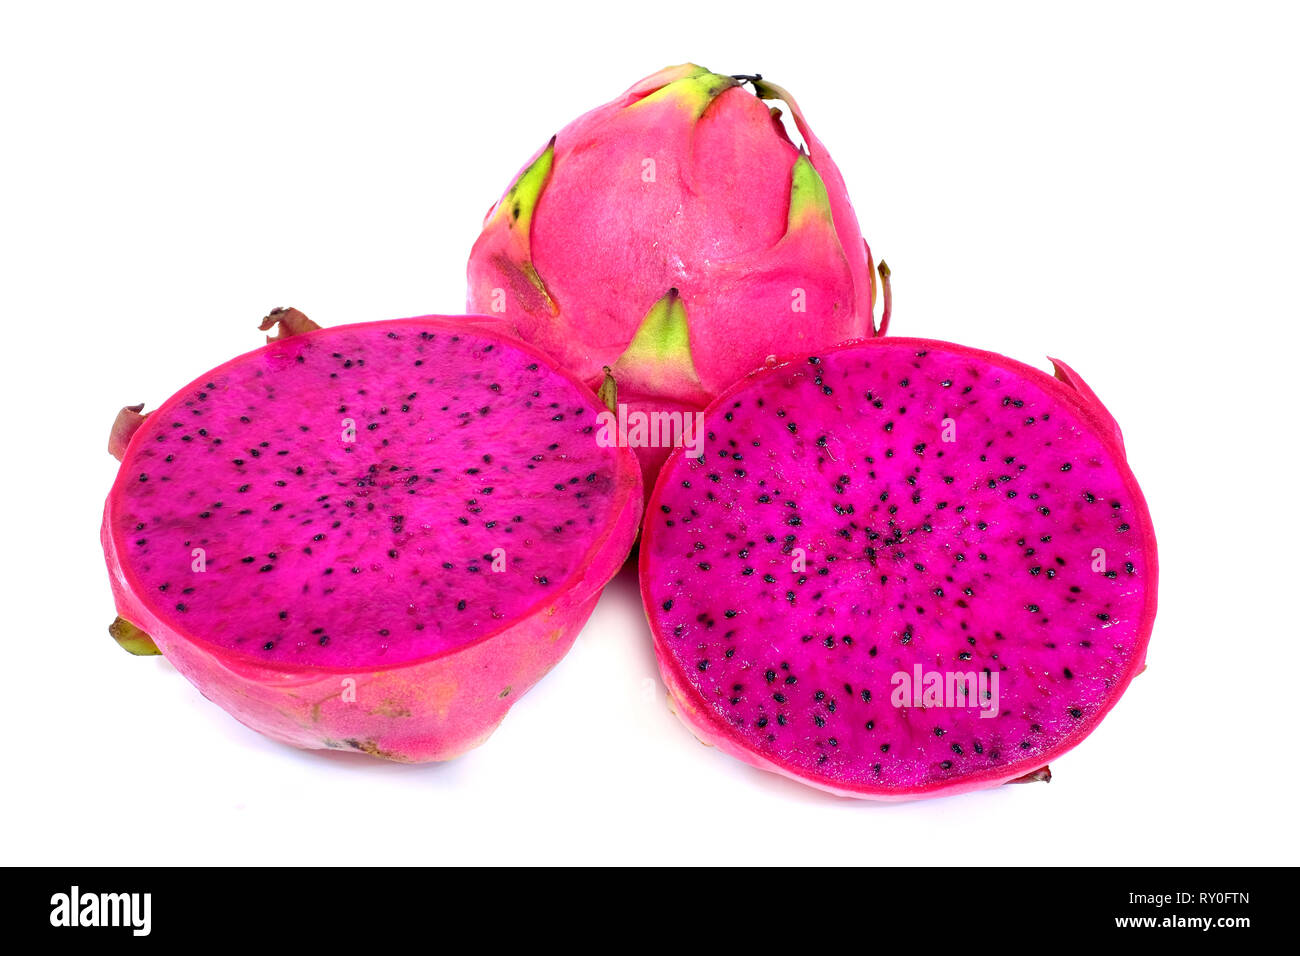 Sliced red pitahaya on a white background Stock Photo